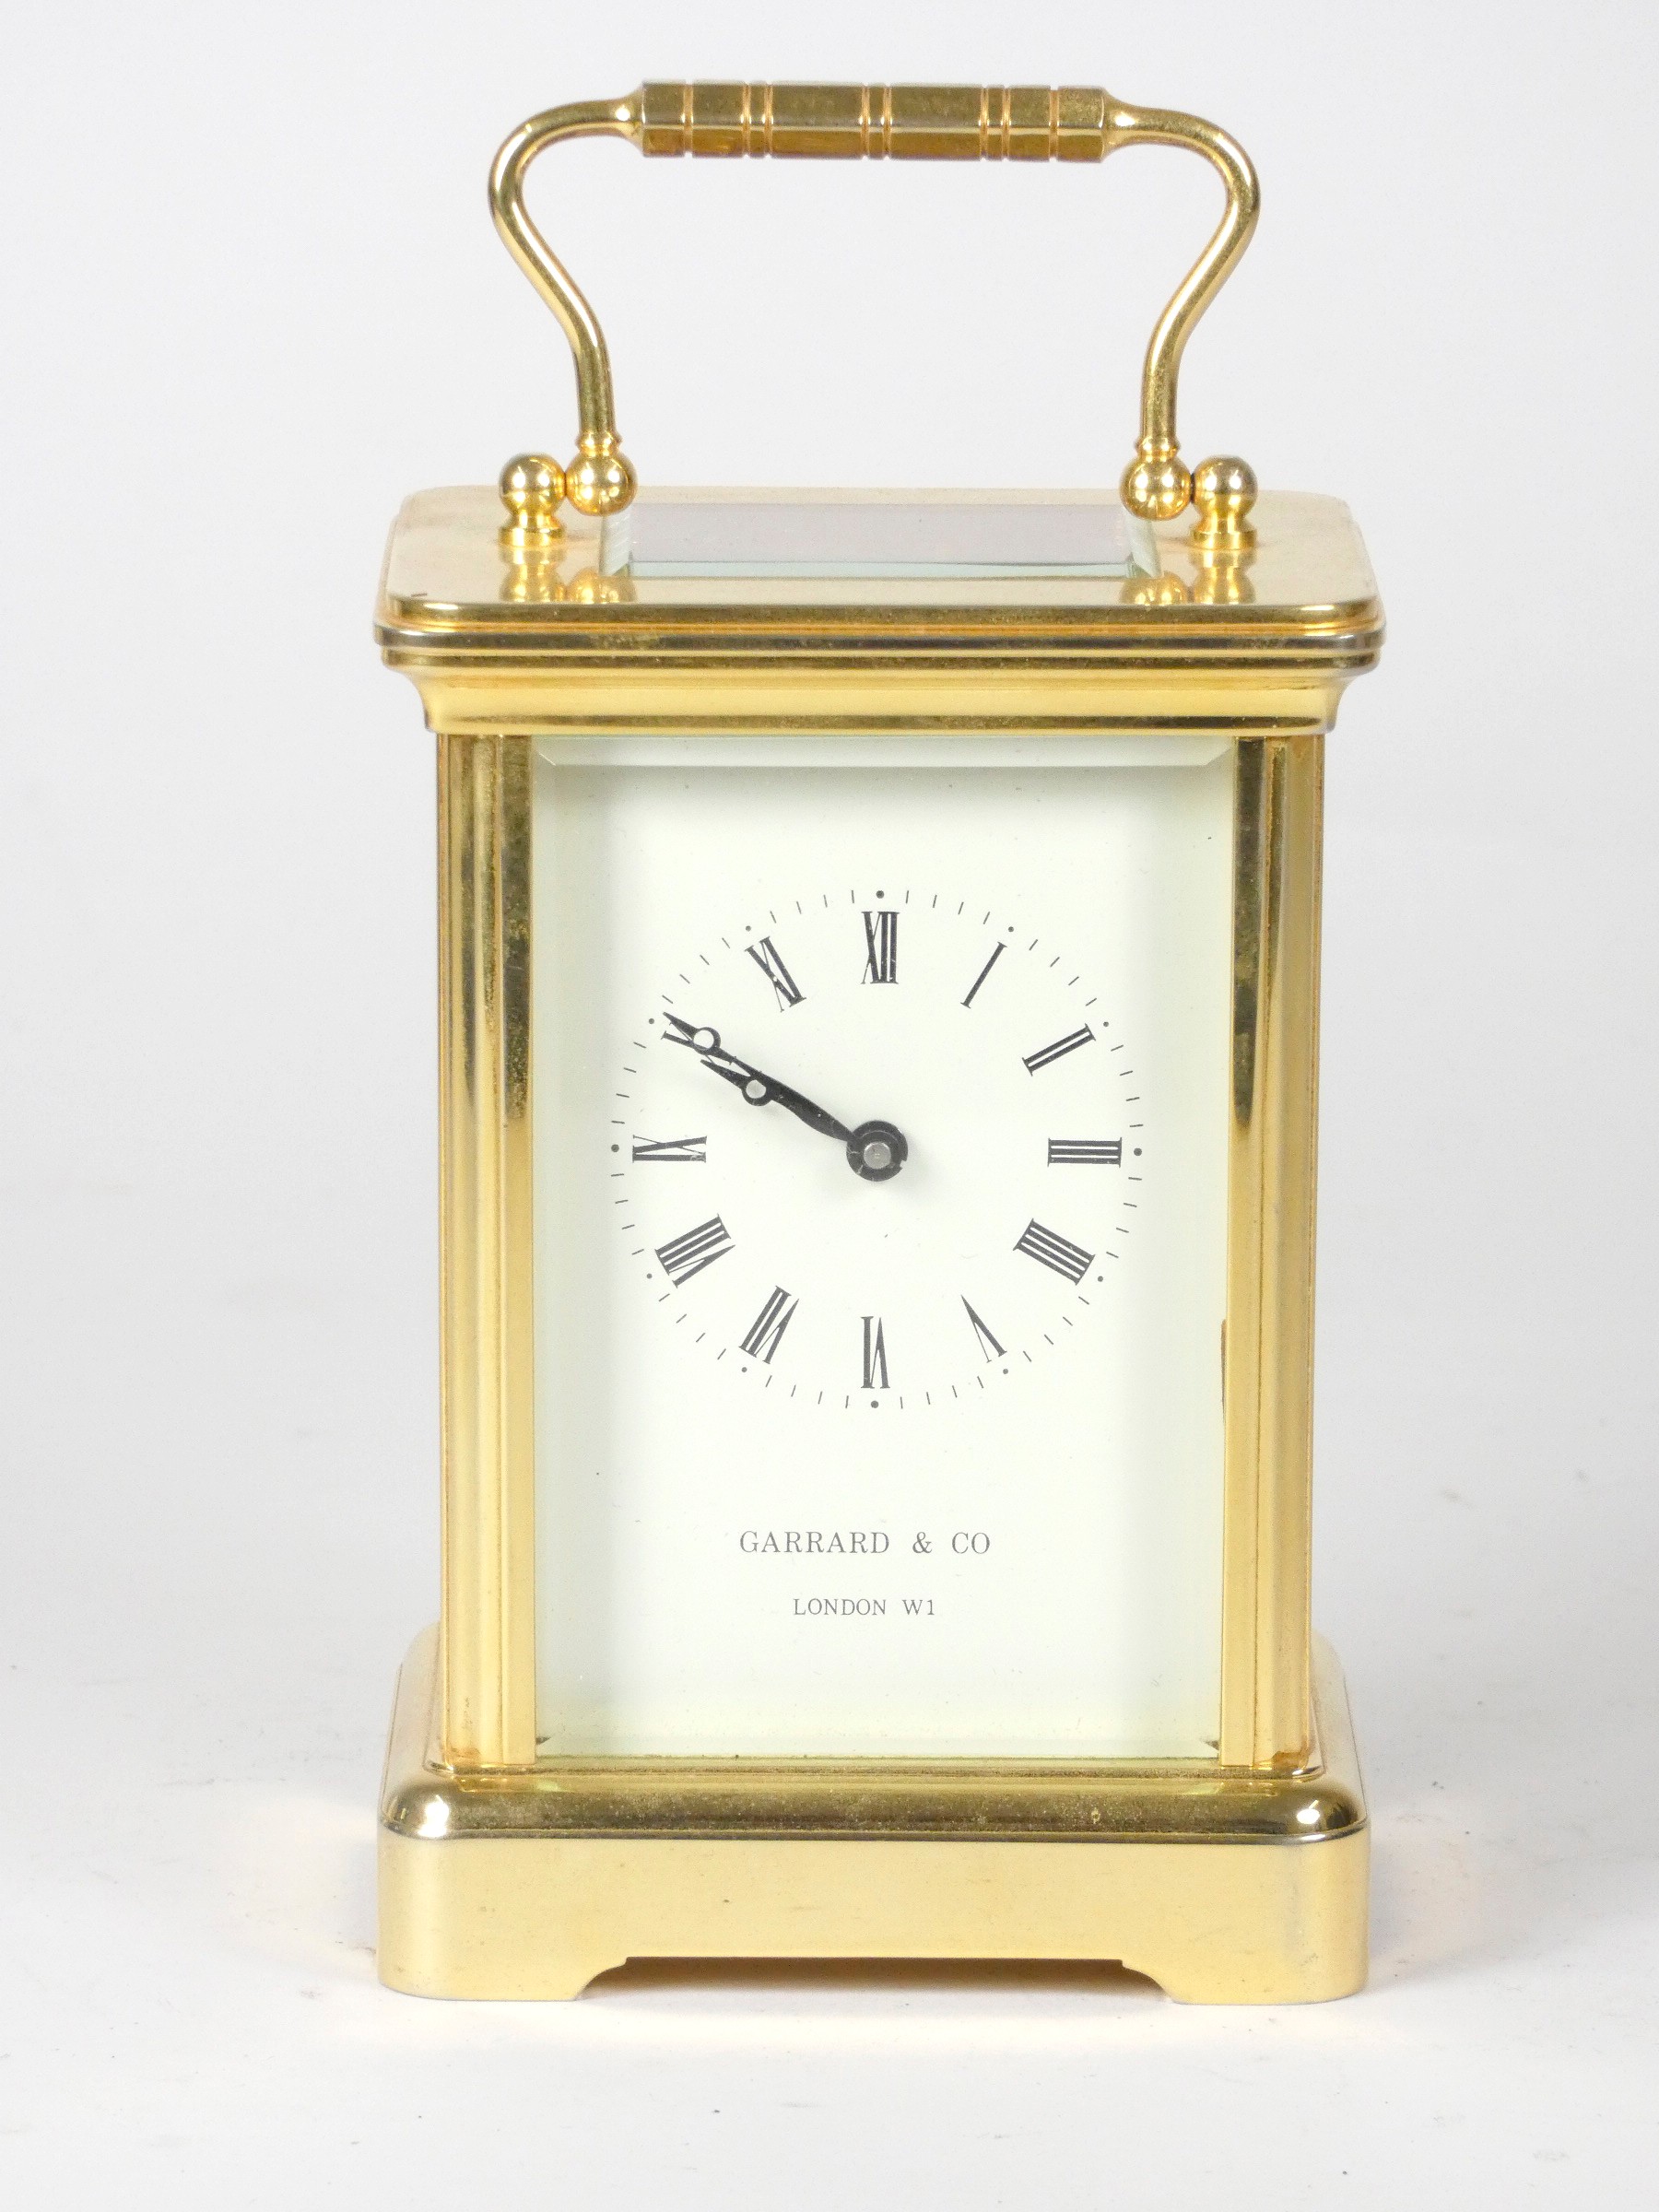 An English 8 day carriage clock, brass cased, bevel edged glass panels with enameled dial and - Image 2 of 4